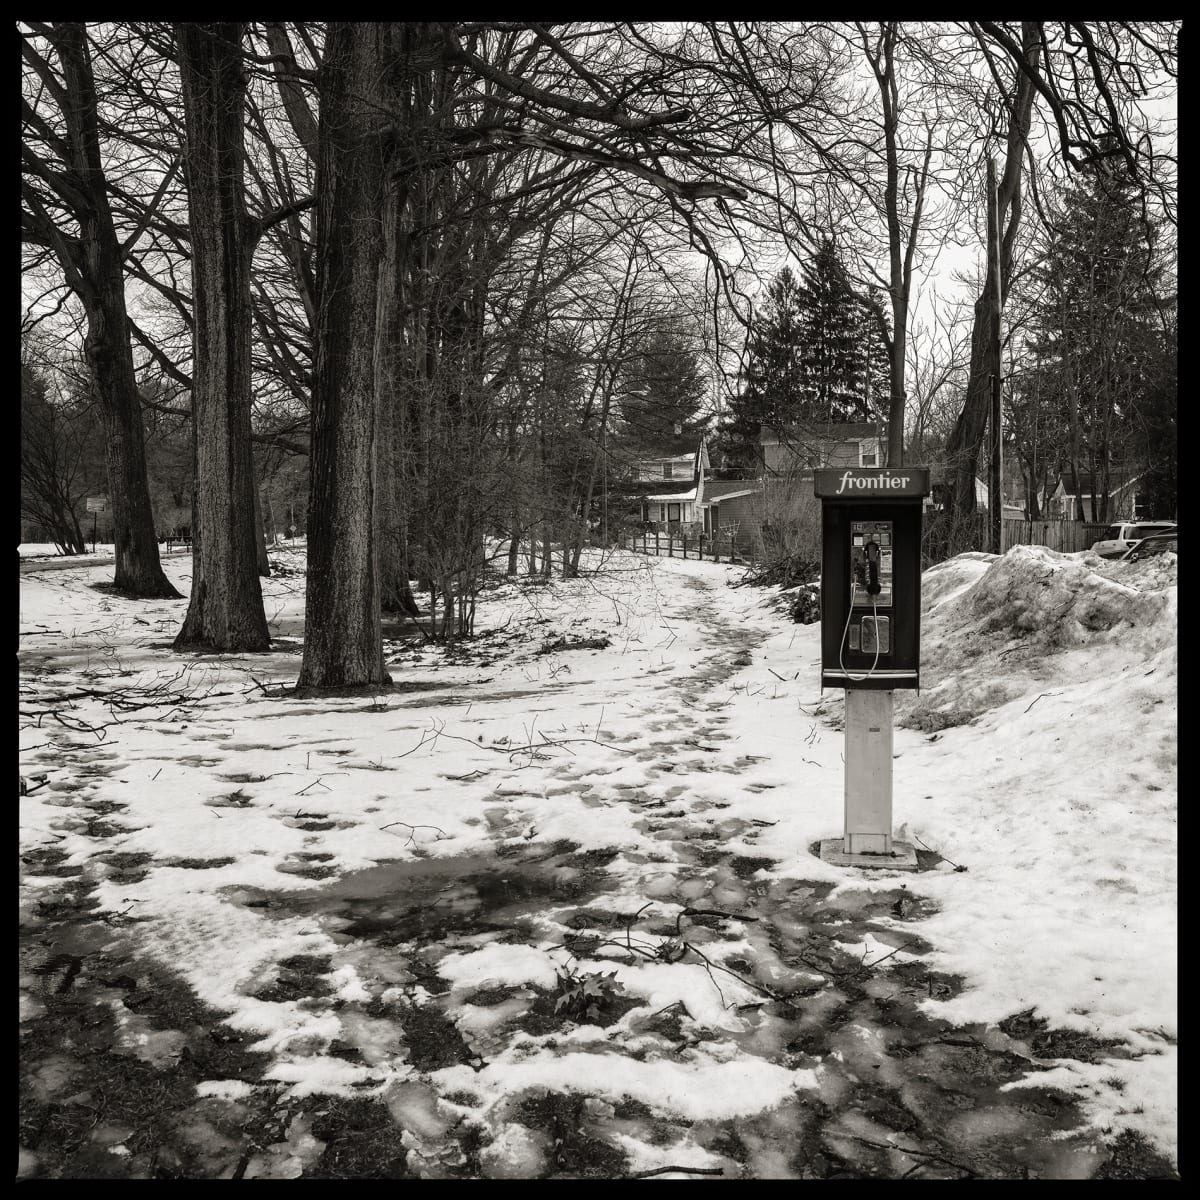 585.323.9830 – Monroe County Parks Department, 4355 Culver Road, Rochester, NY 14622 by Eric T. Kunsman  Image: ID: A black and white image shows a snowy path that has trees lining the left side and a payphone on the right.  There are evergreen trees in the background.